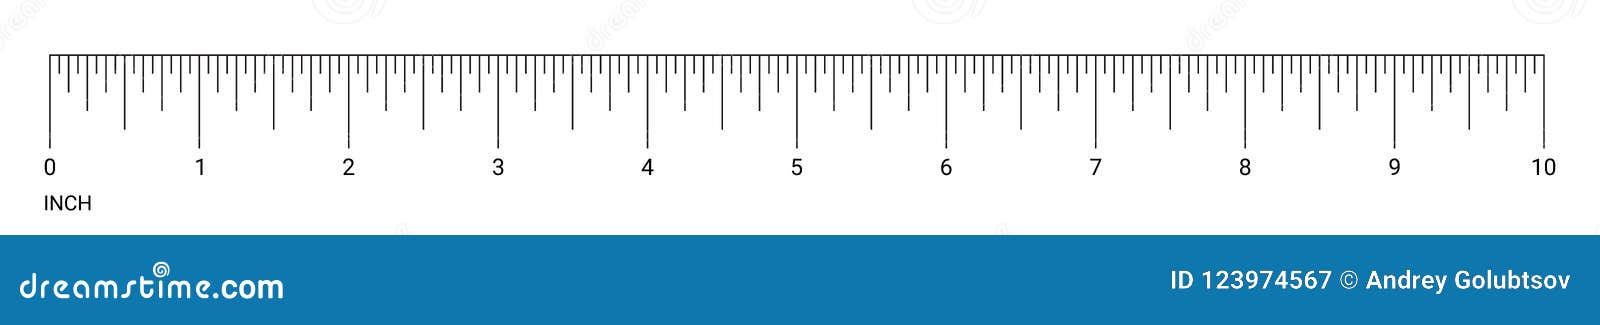 Inches Chart Ruler